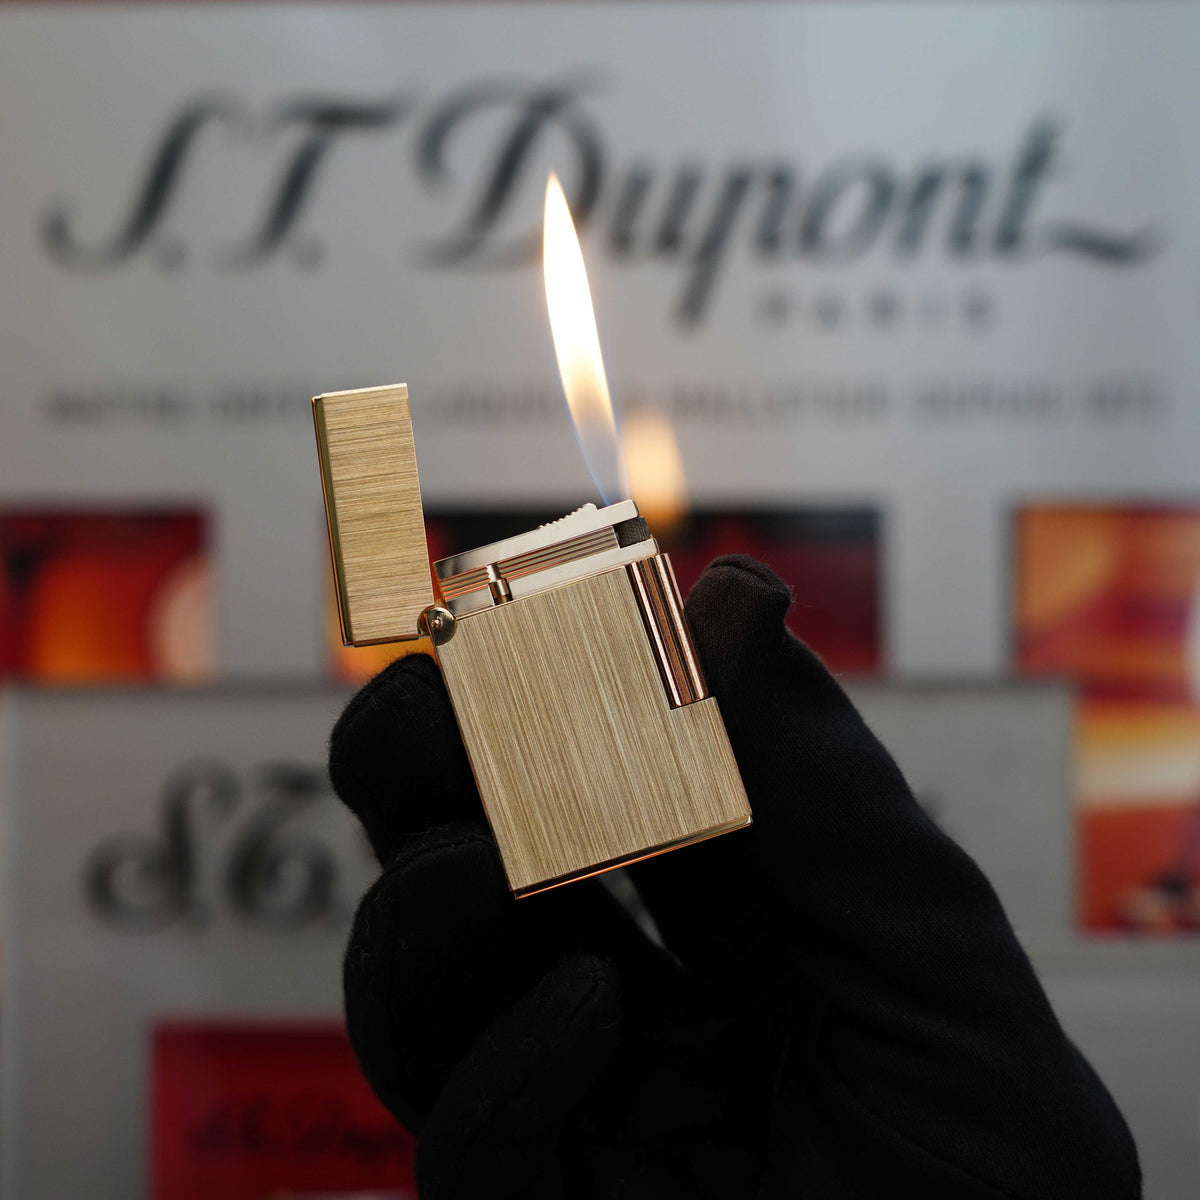 A gloved hand holds an open gold lighter with a lit flame in front of a blurred background, showcasing the "S.T. Dupont" branding. This exquisite piece from the Vintage 1980 St Dupont Gold brushed finish Medium Ligne 2 lighter collection exemplifies timeless elegance and craftsmanship.